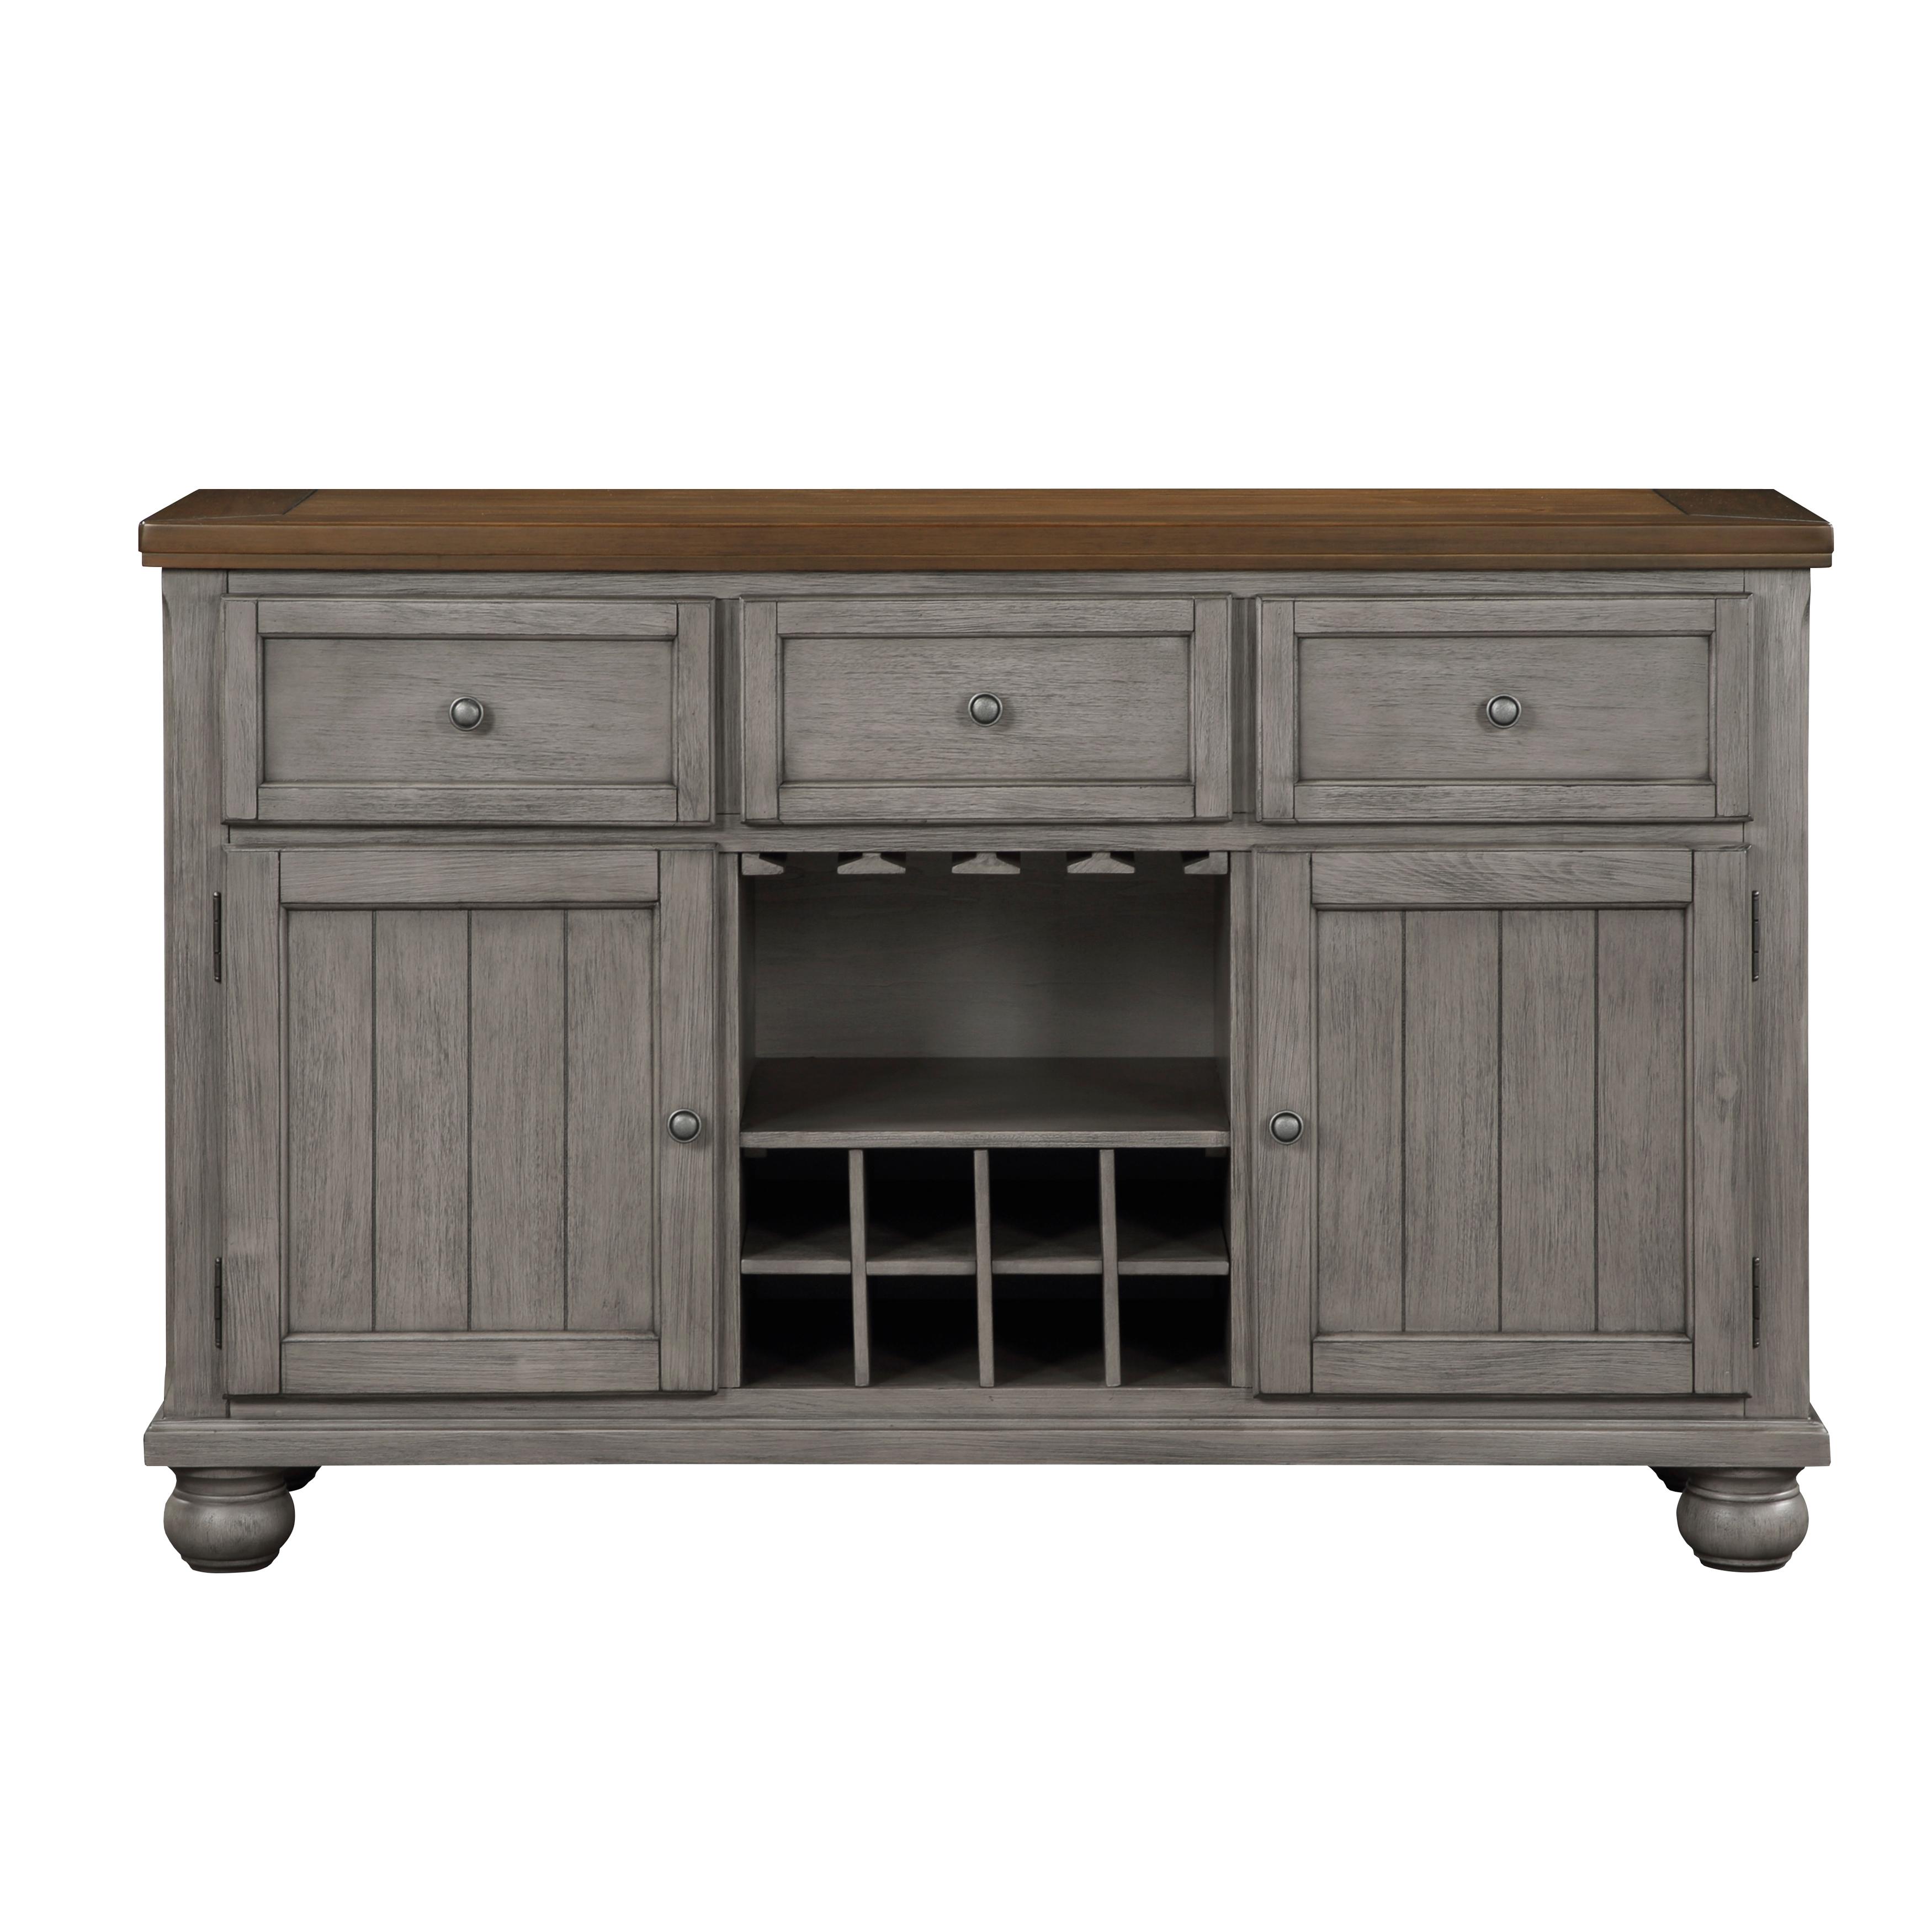 Traditional Server Tigard Collection Server 5761GY-40-S 5761GY-40-S in Gray Finish 